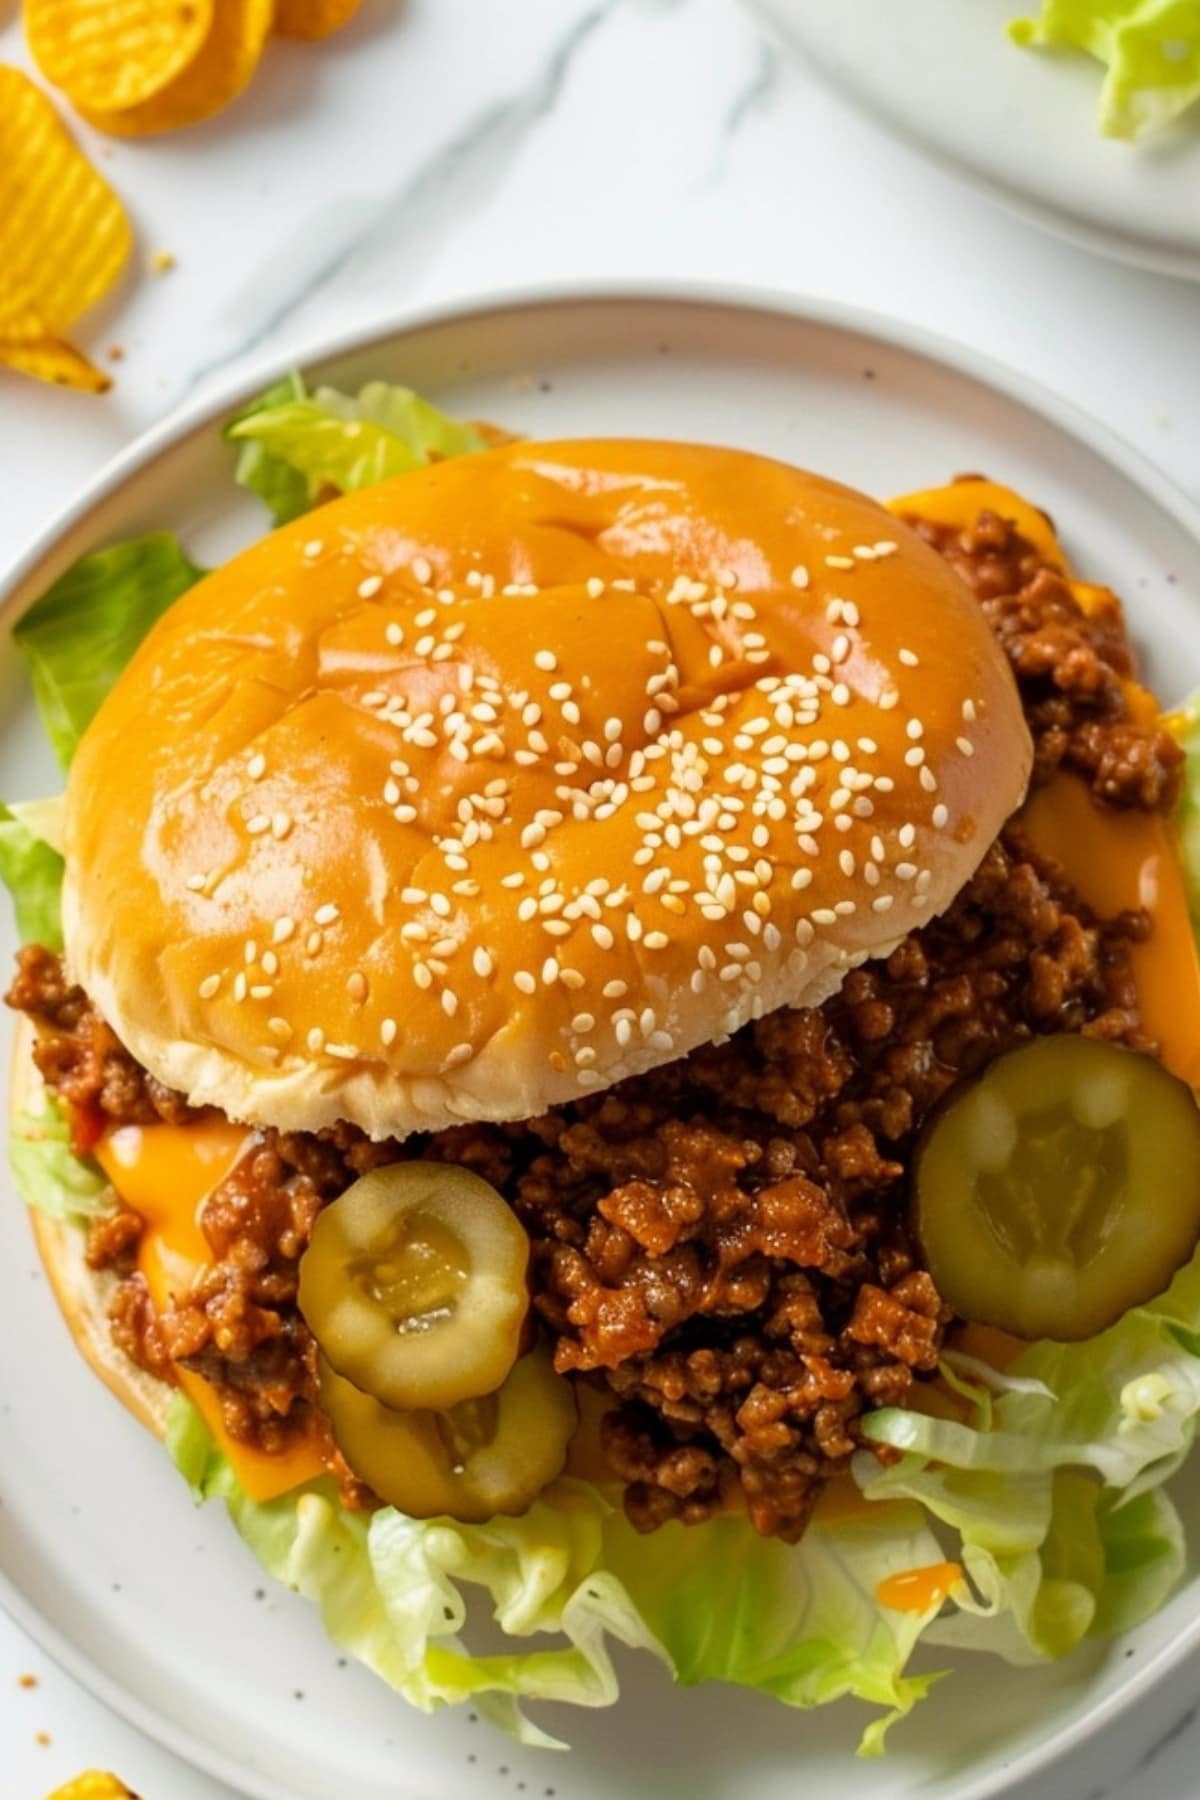 Angled view of meaty and cheesy Big Mac Sloppy Joe in a plate with lettuce, melted cheese and dill pickles.